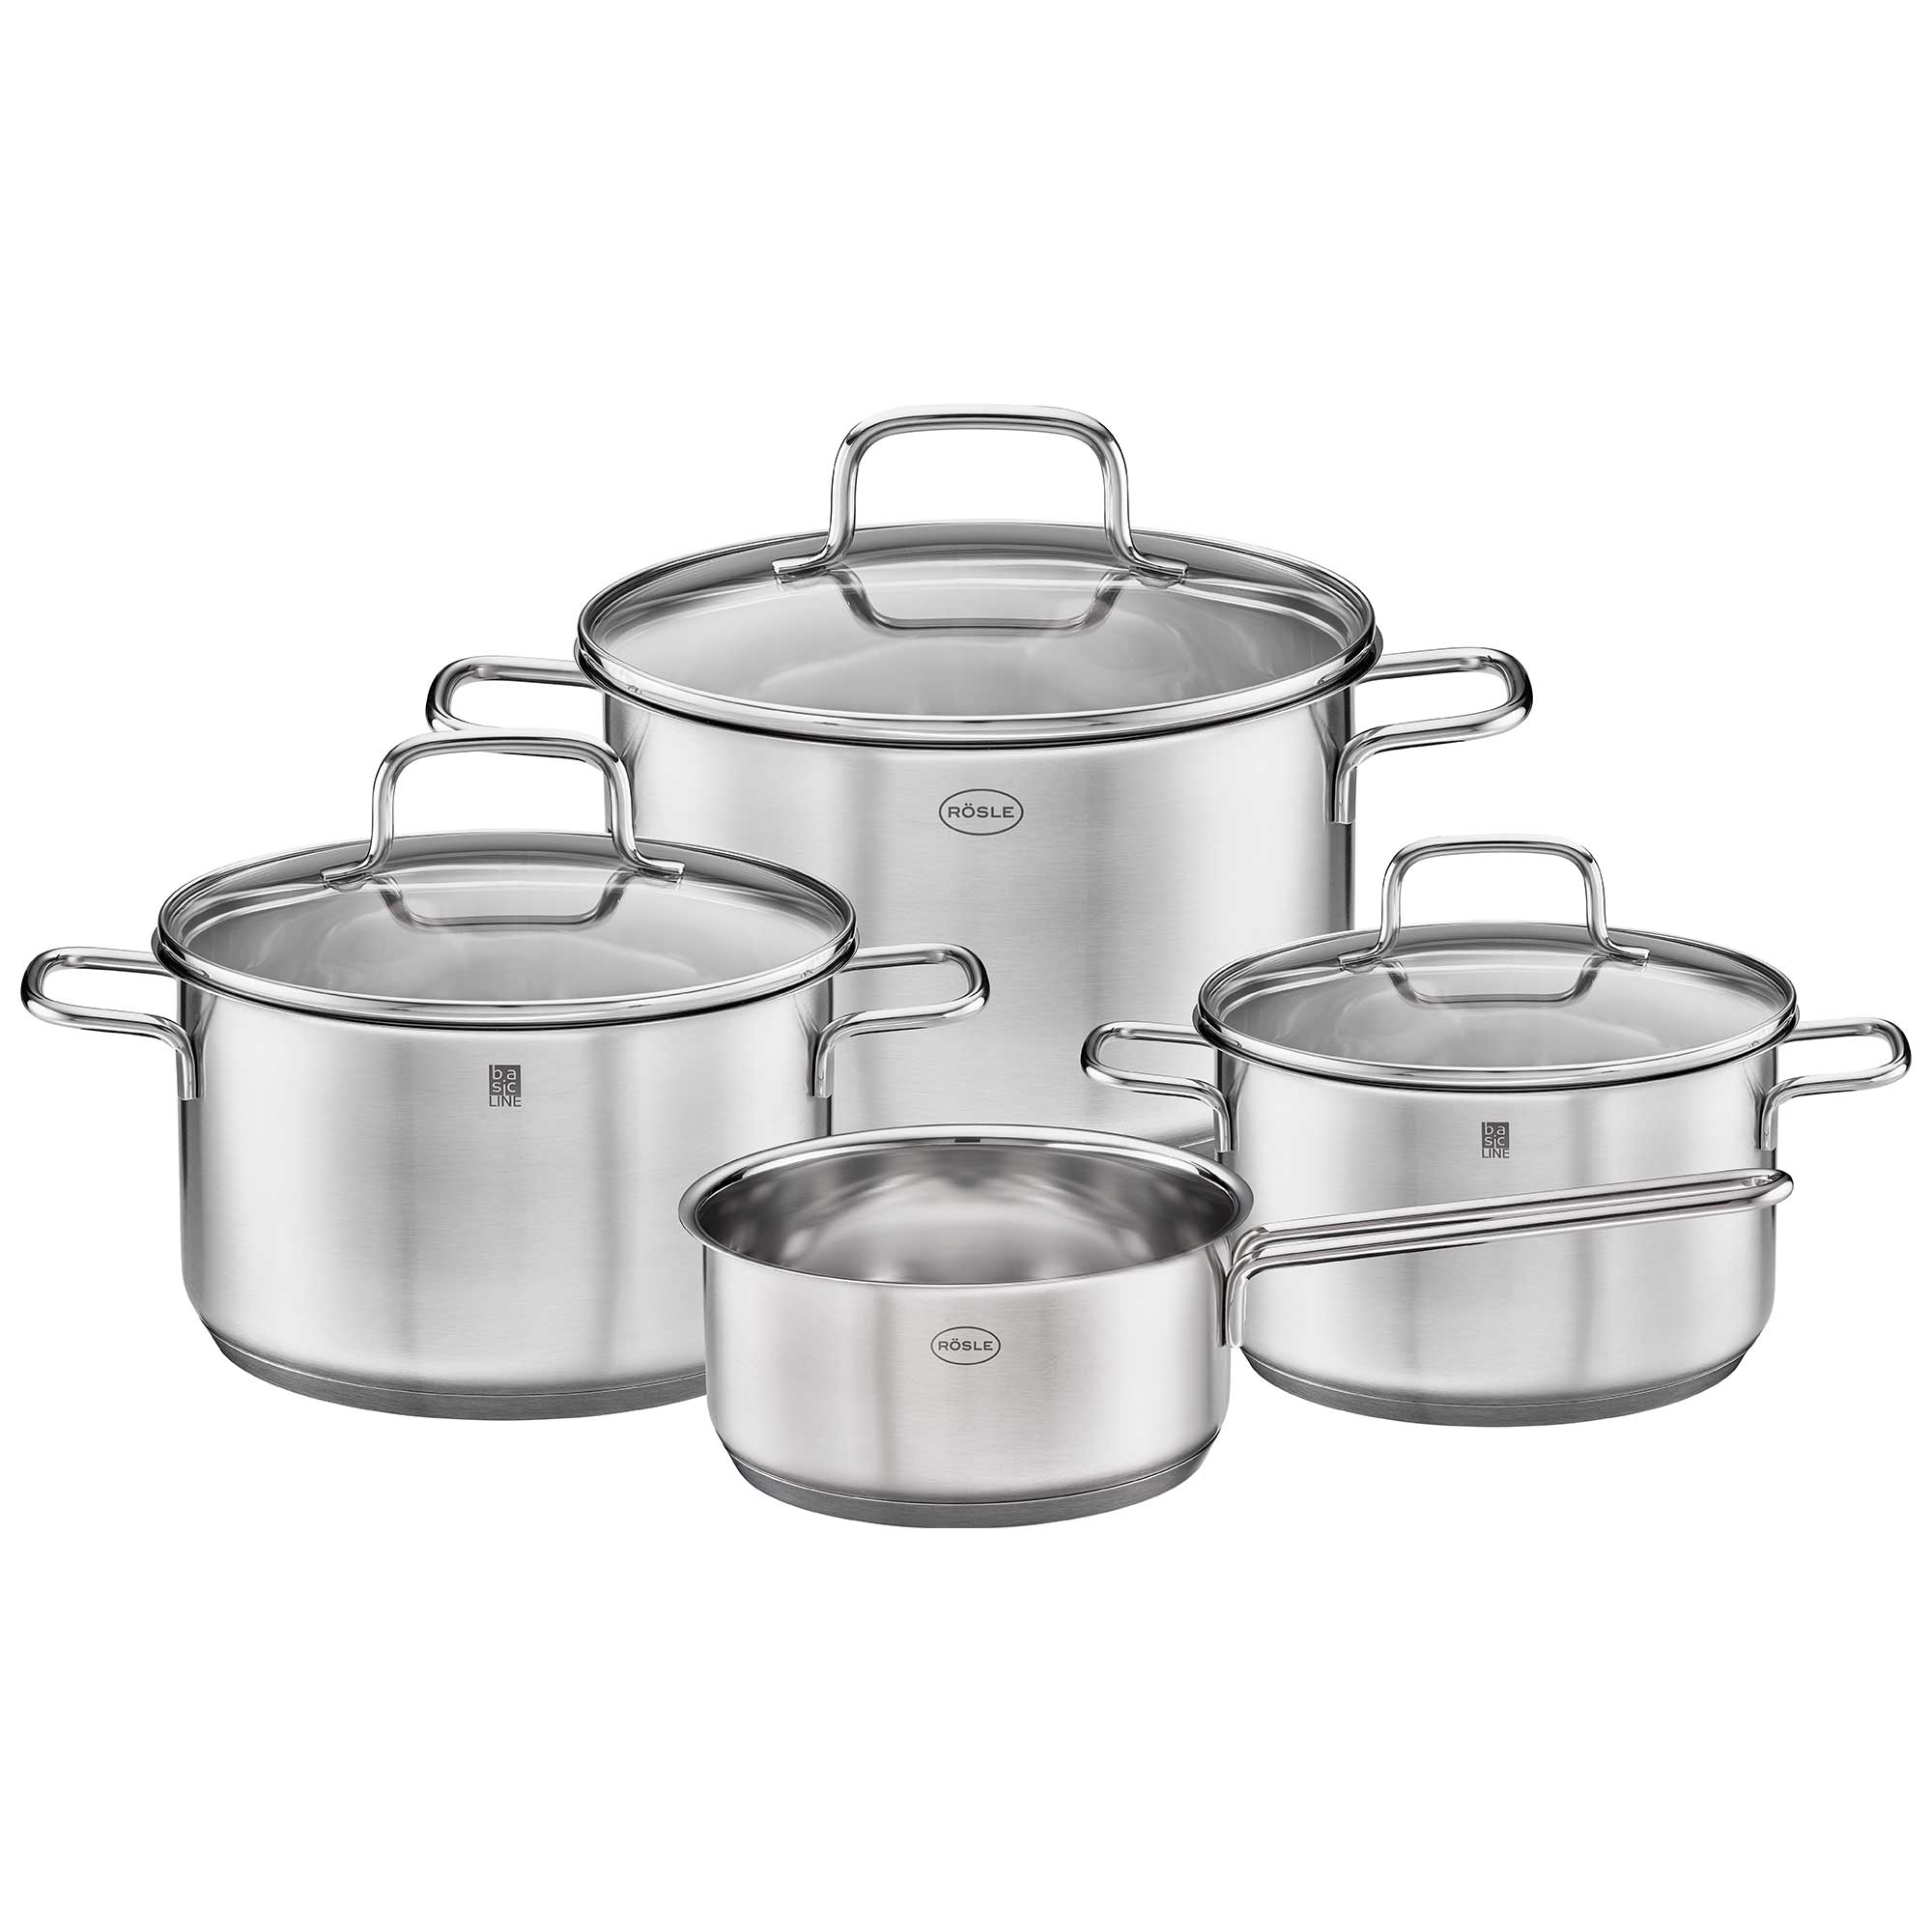 Pot set Basic Line 4 pcs. (18/10 stainless steel) with glass lid